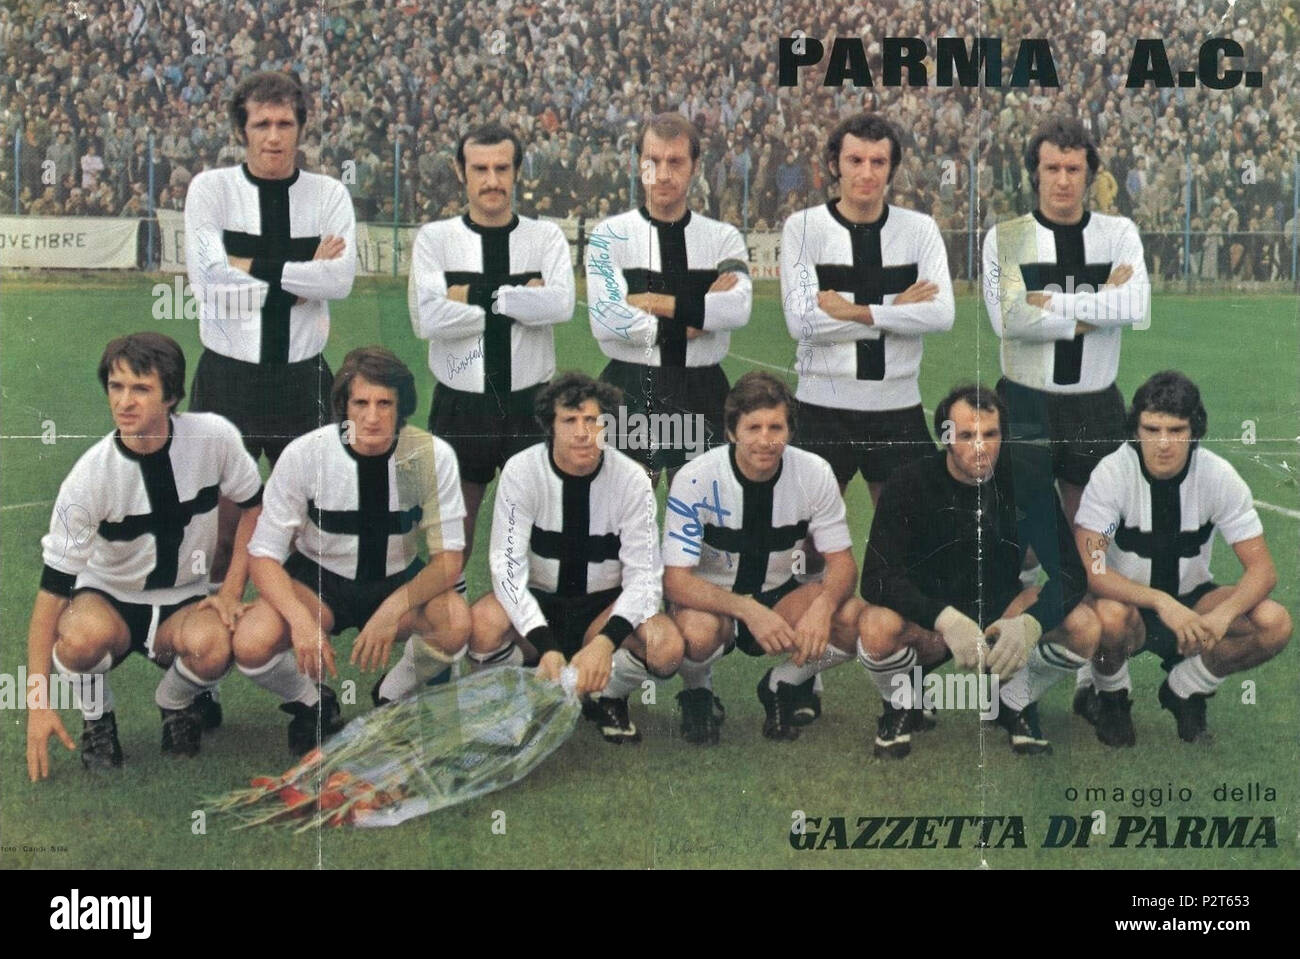 Calcio 1973 1974 High Resolution Stock Photography and Images - Alamy